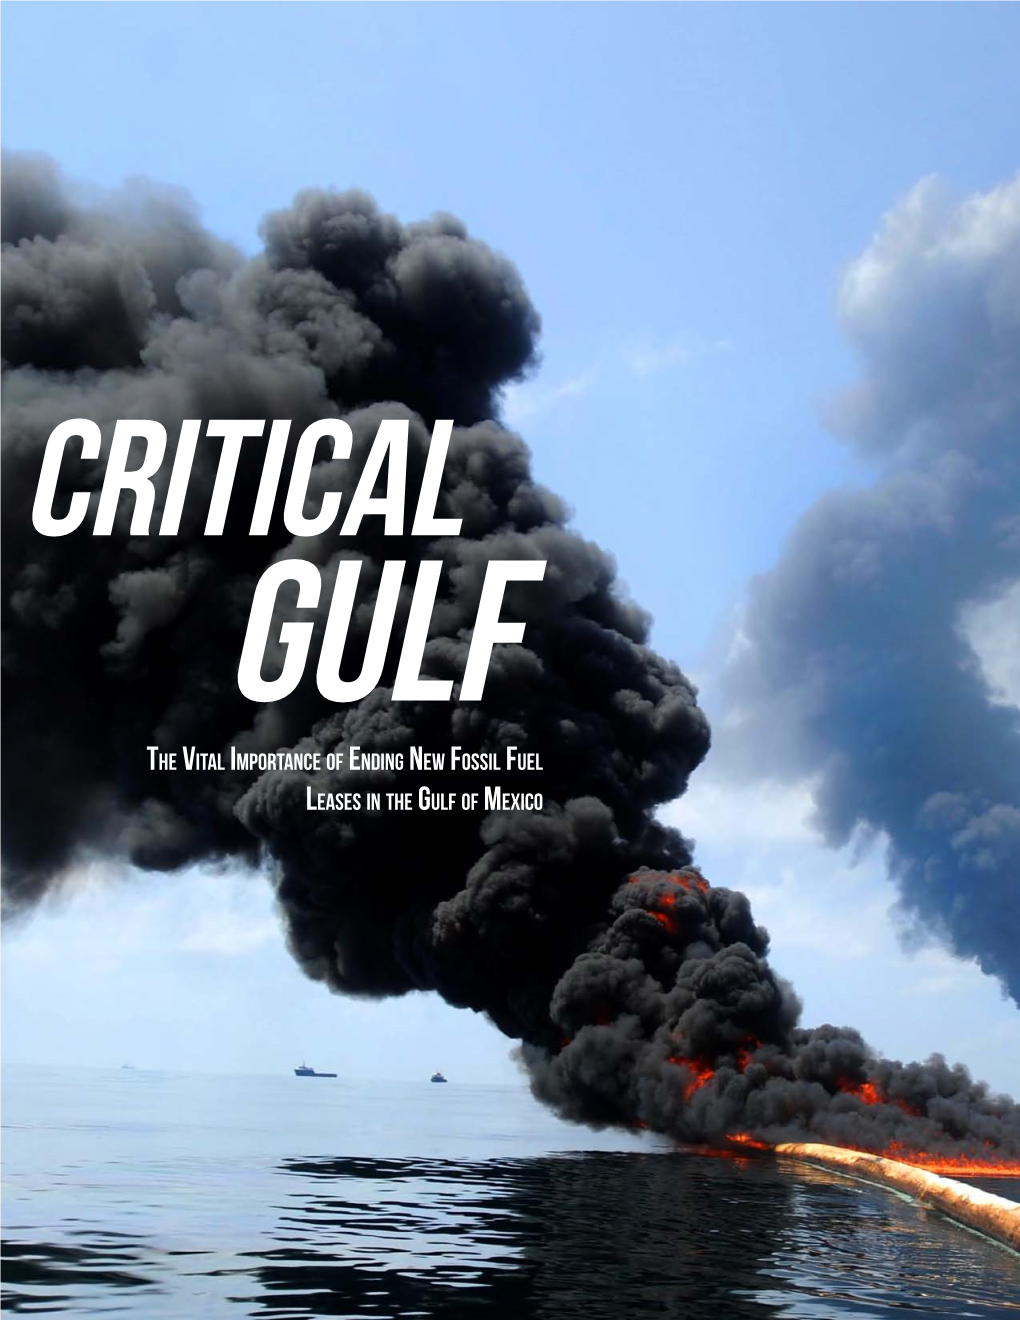 The Vital Importance of Ending New Fossil Fuel Leases in the Gulf of Mexico